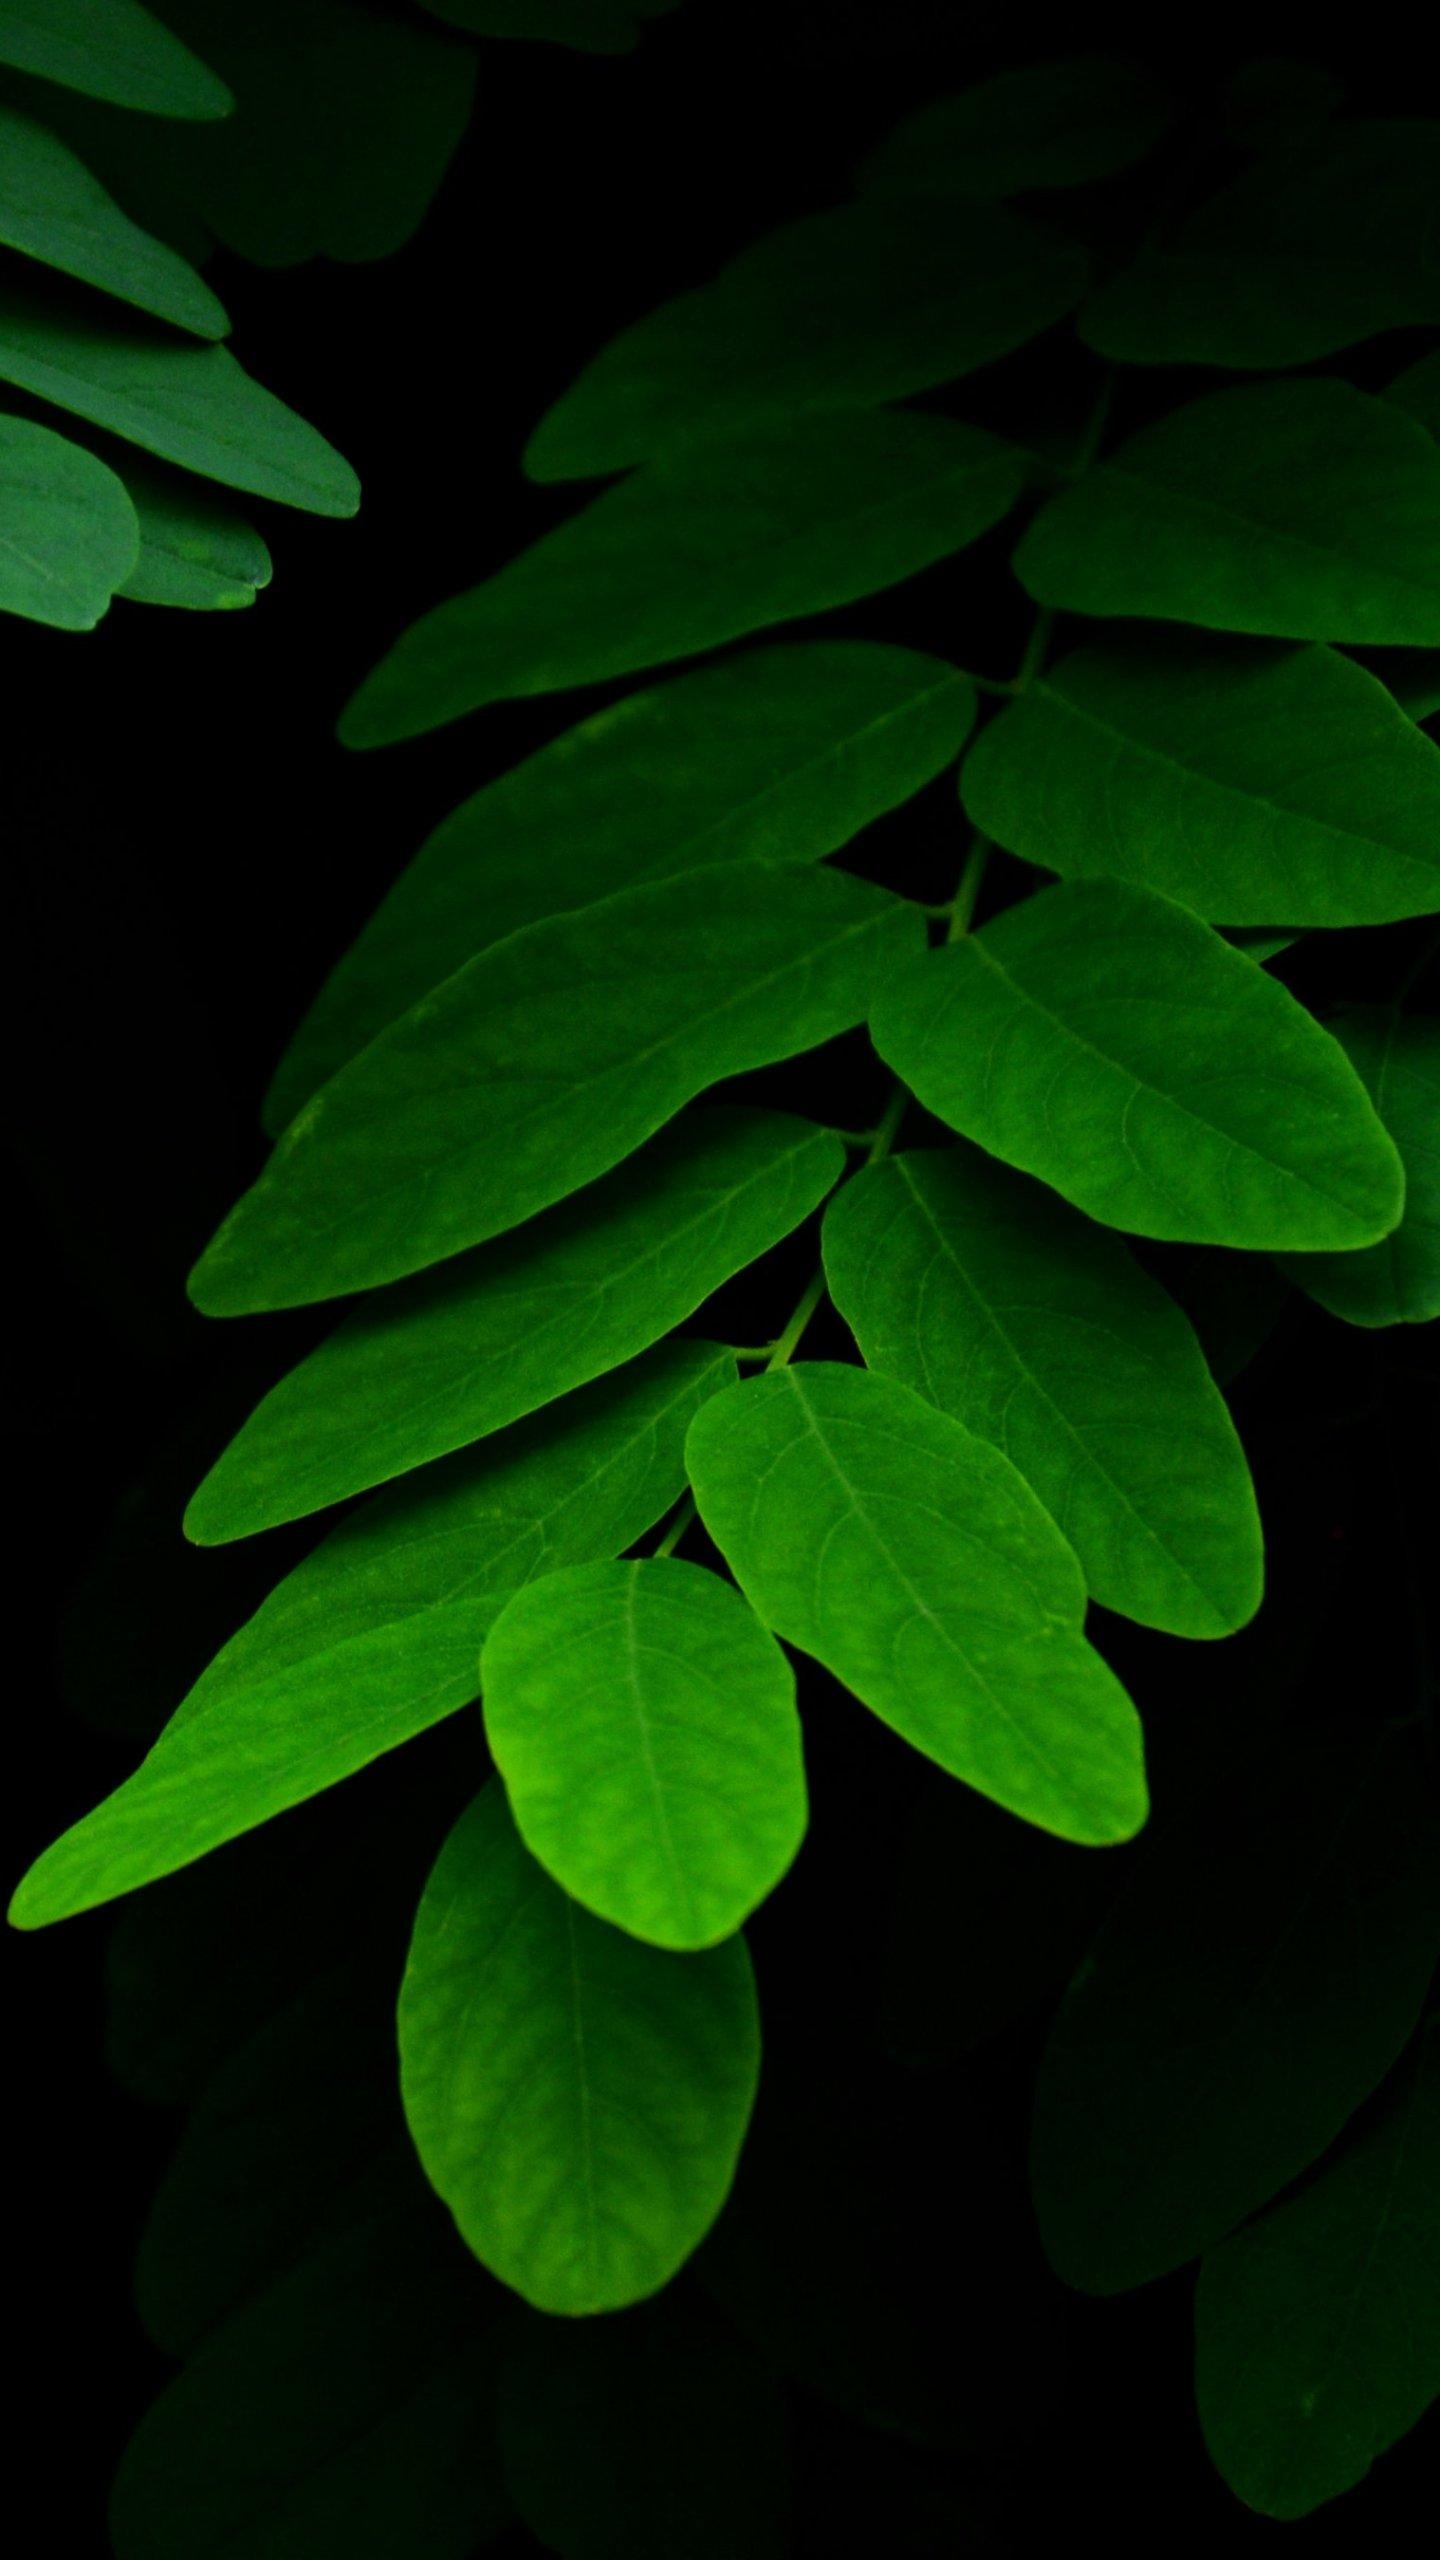 Green Leaf: The most important organs of most vascular plants, Leaves in a jungle forest, Beauty of nature. 1440x2560 HD Wallpaper.